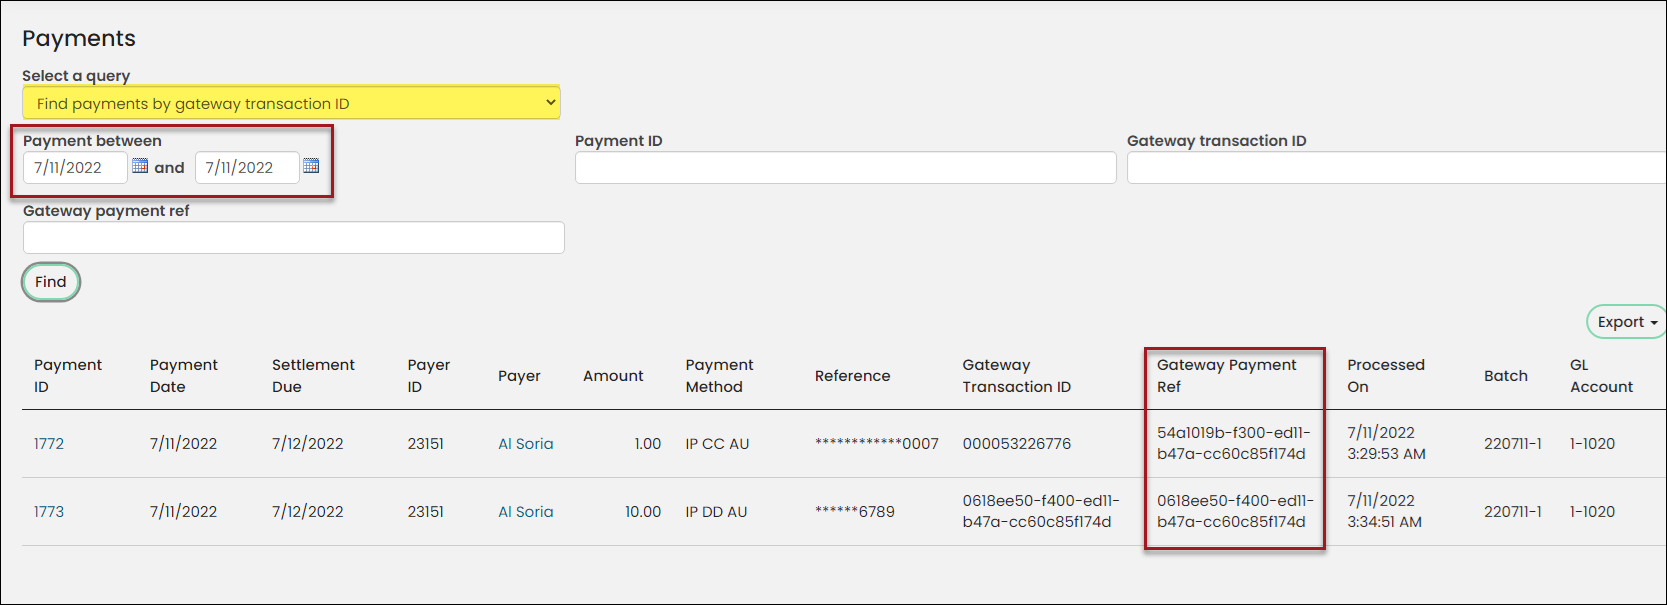 Using the gateway payment ref to find a payment